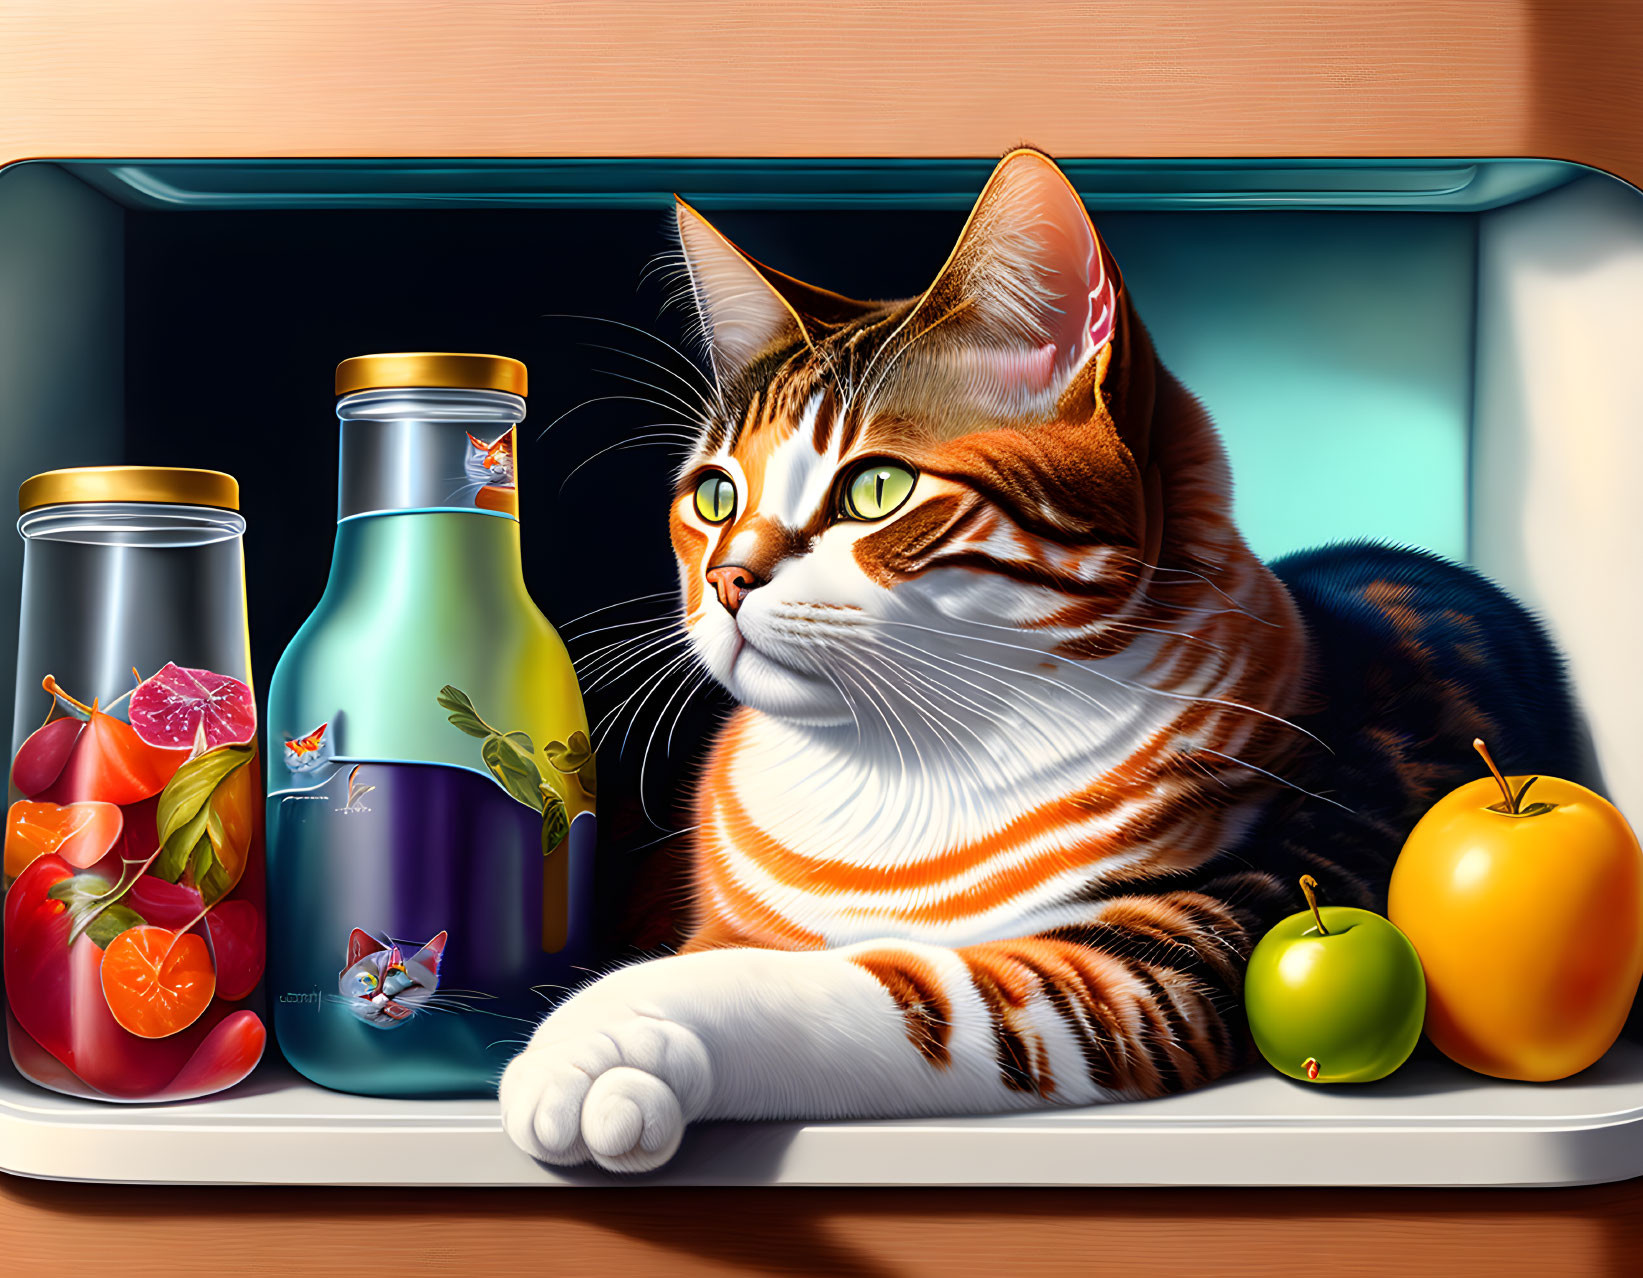 Hyper-realistic illustration of orange and white striped cat with fruit juice bottles and apples